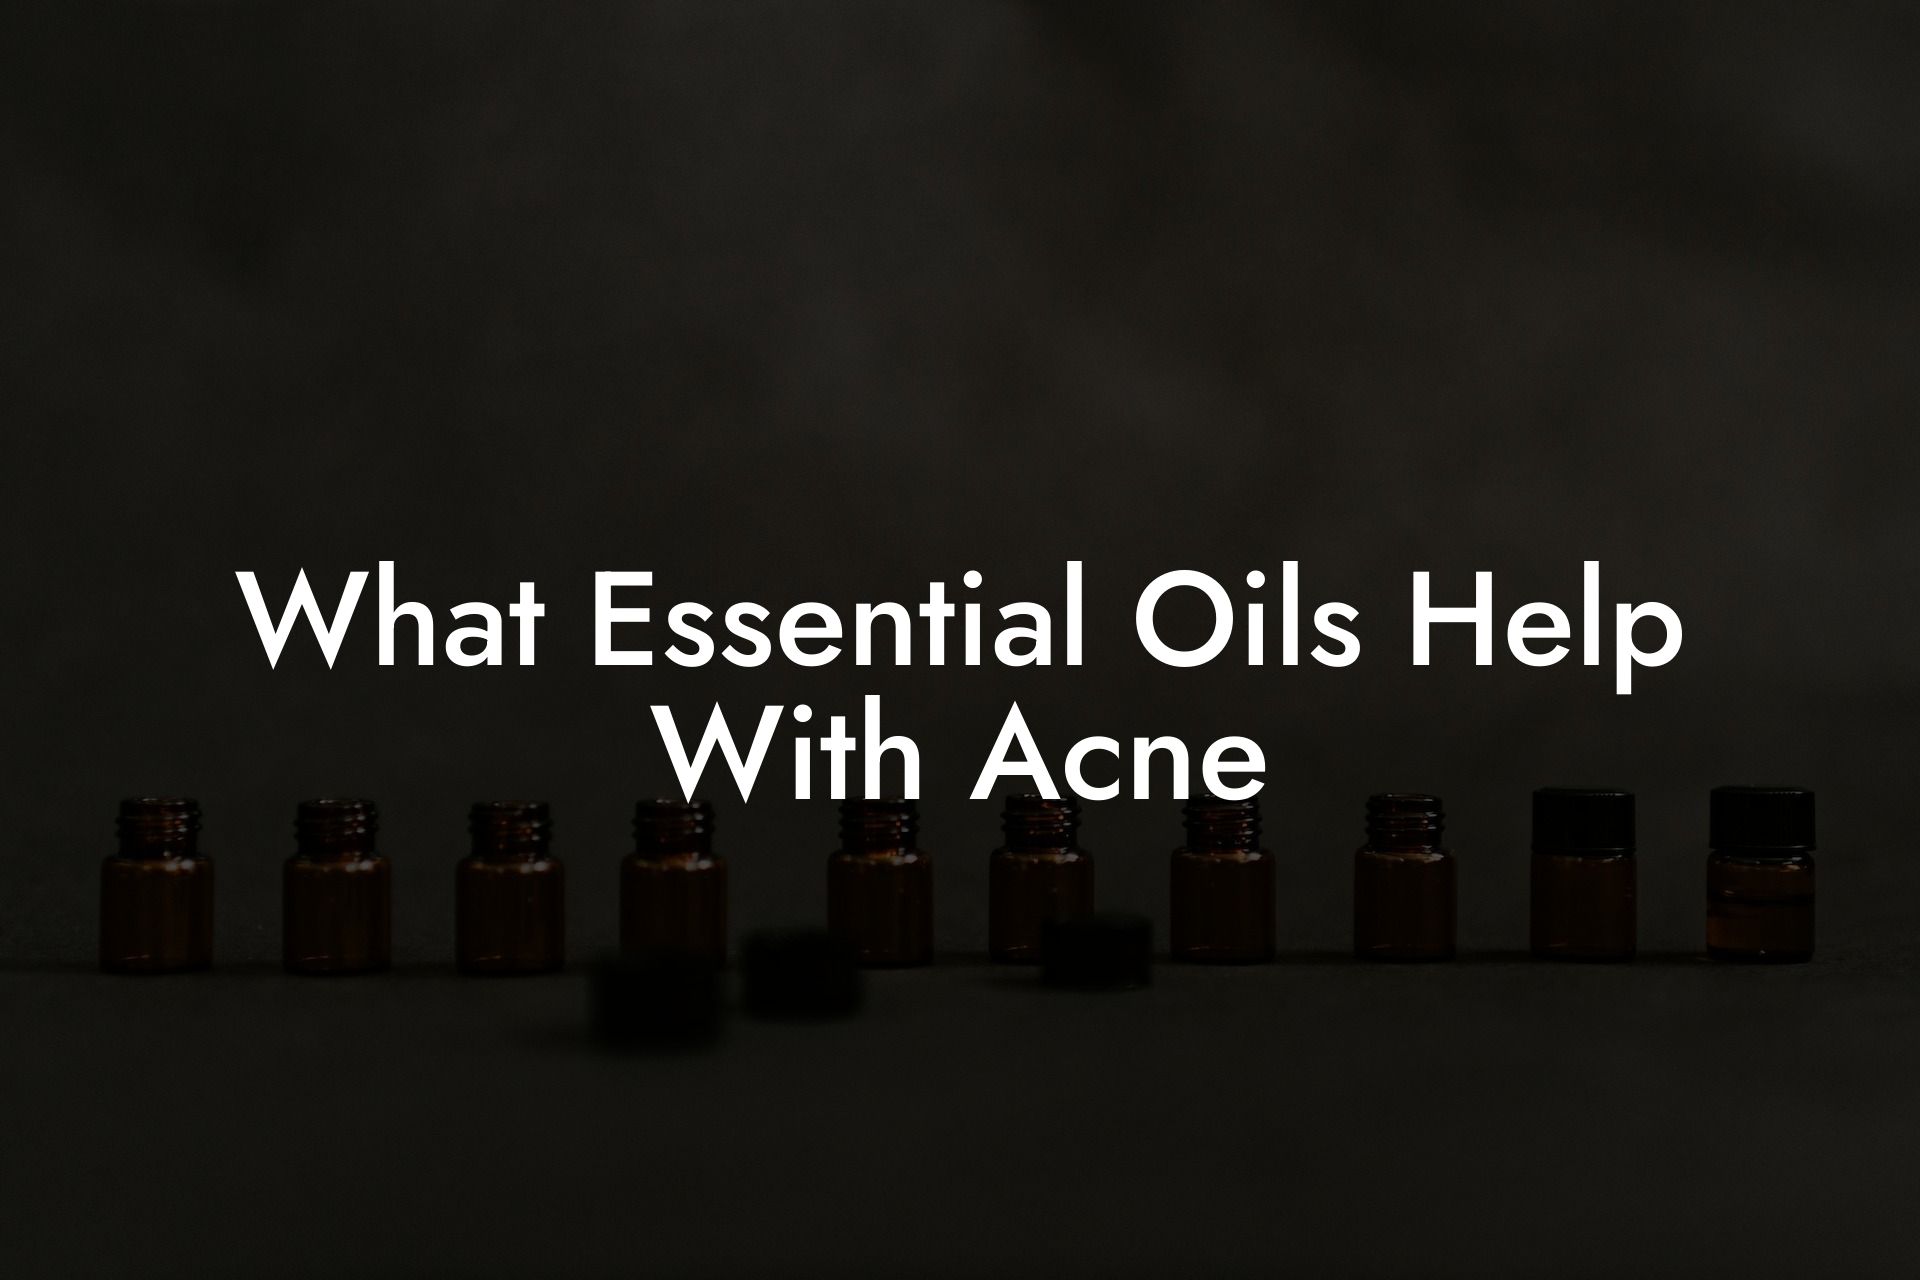 What Essential Oils Help With Acne